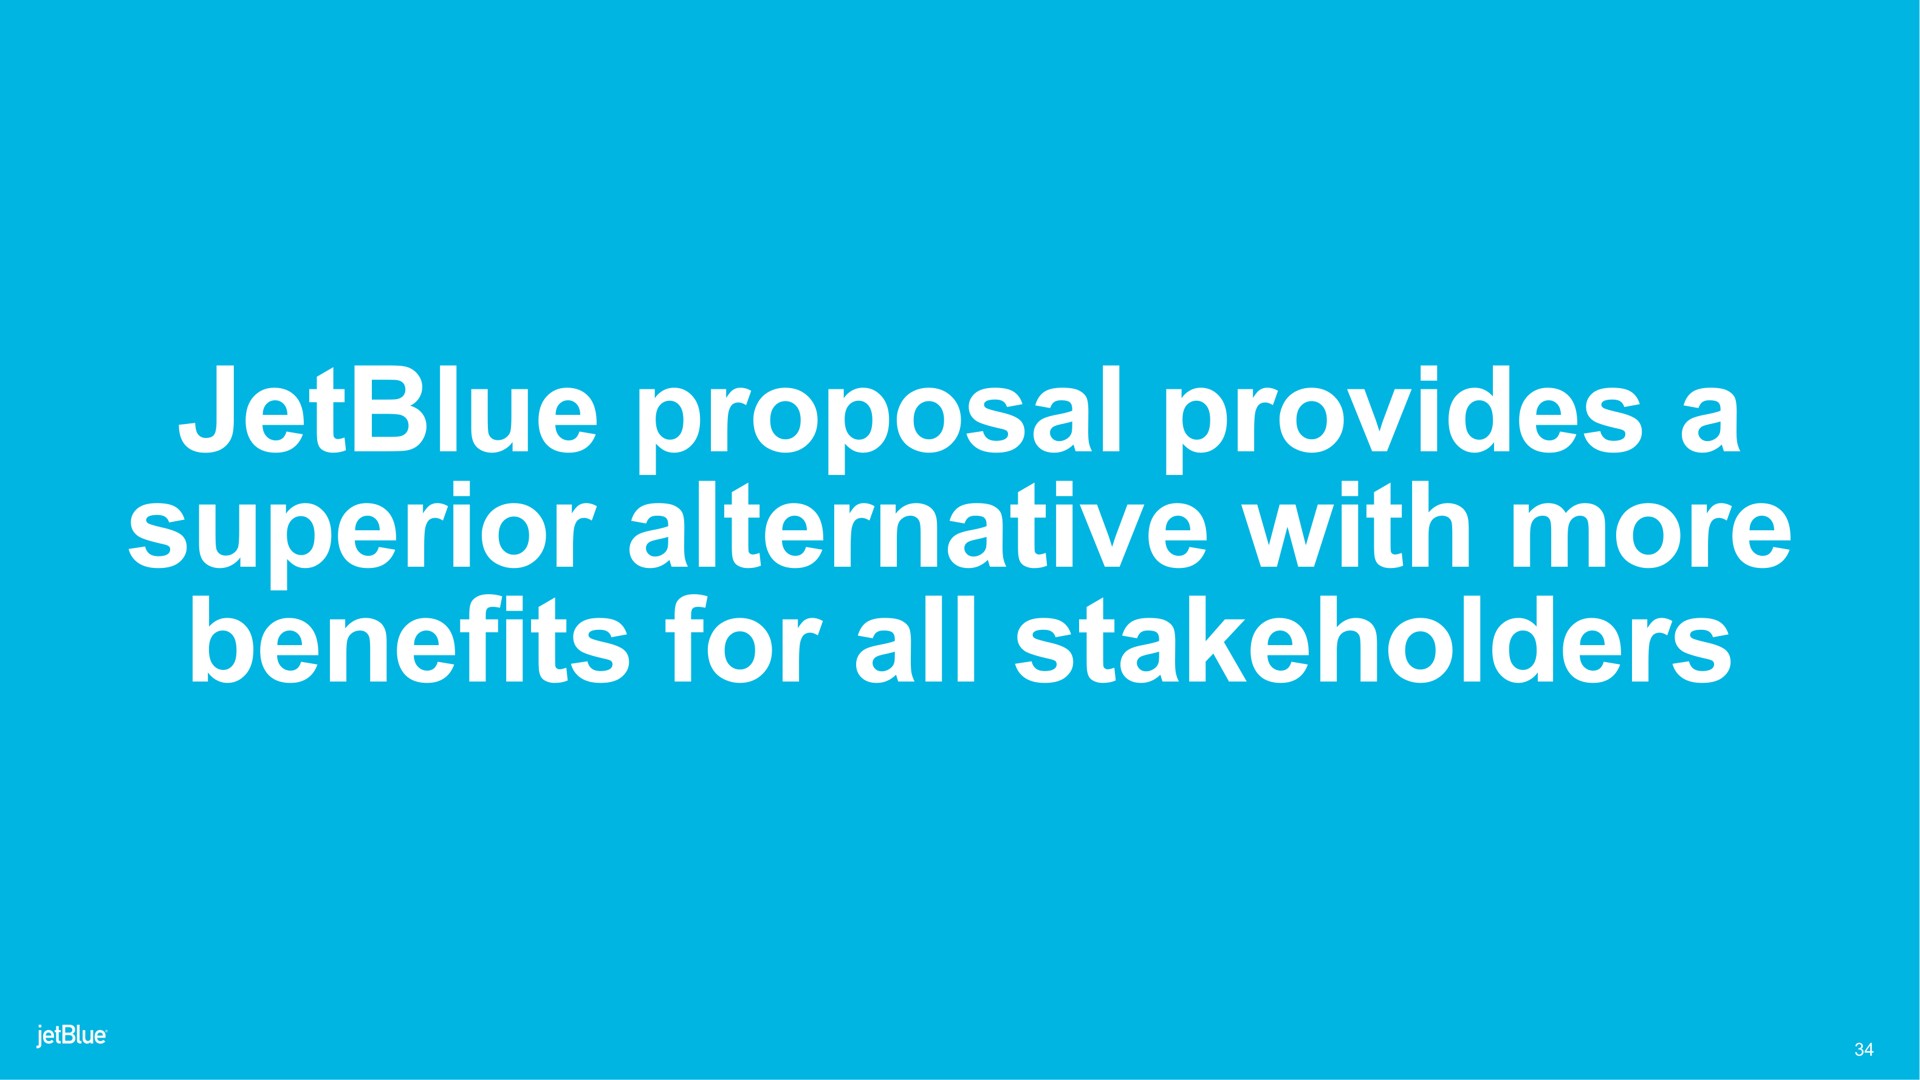 proposal provides a superior alternative with more benefits for all stakeholders | jetBlue